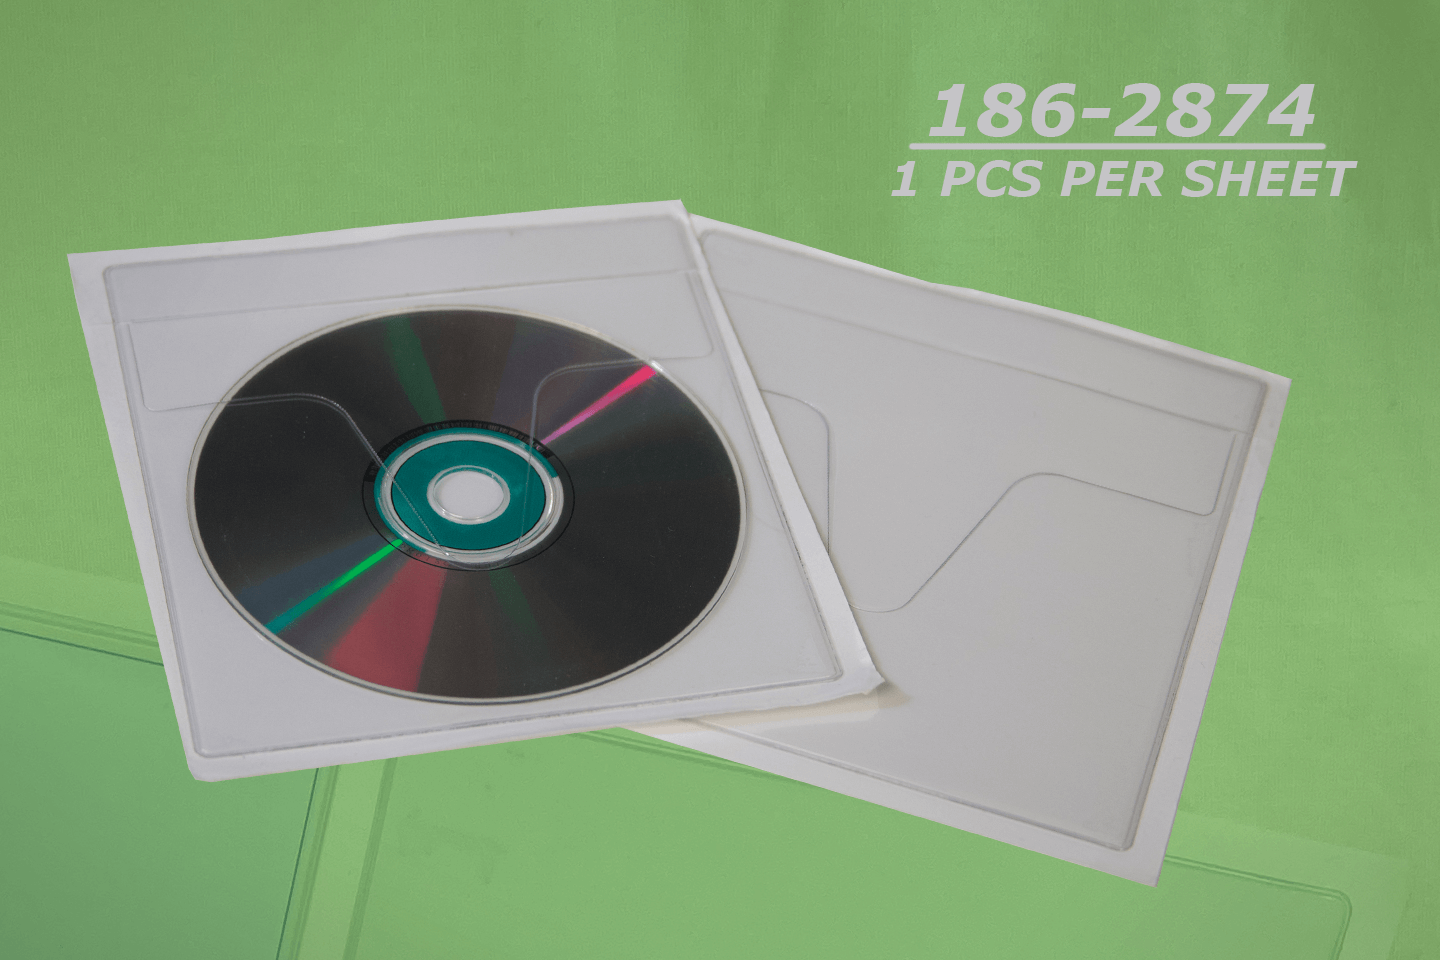 5 3/8" x 5 7/8" Tamper Evident Adhesive CD Pouch